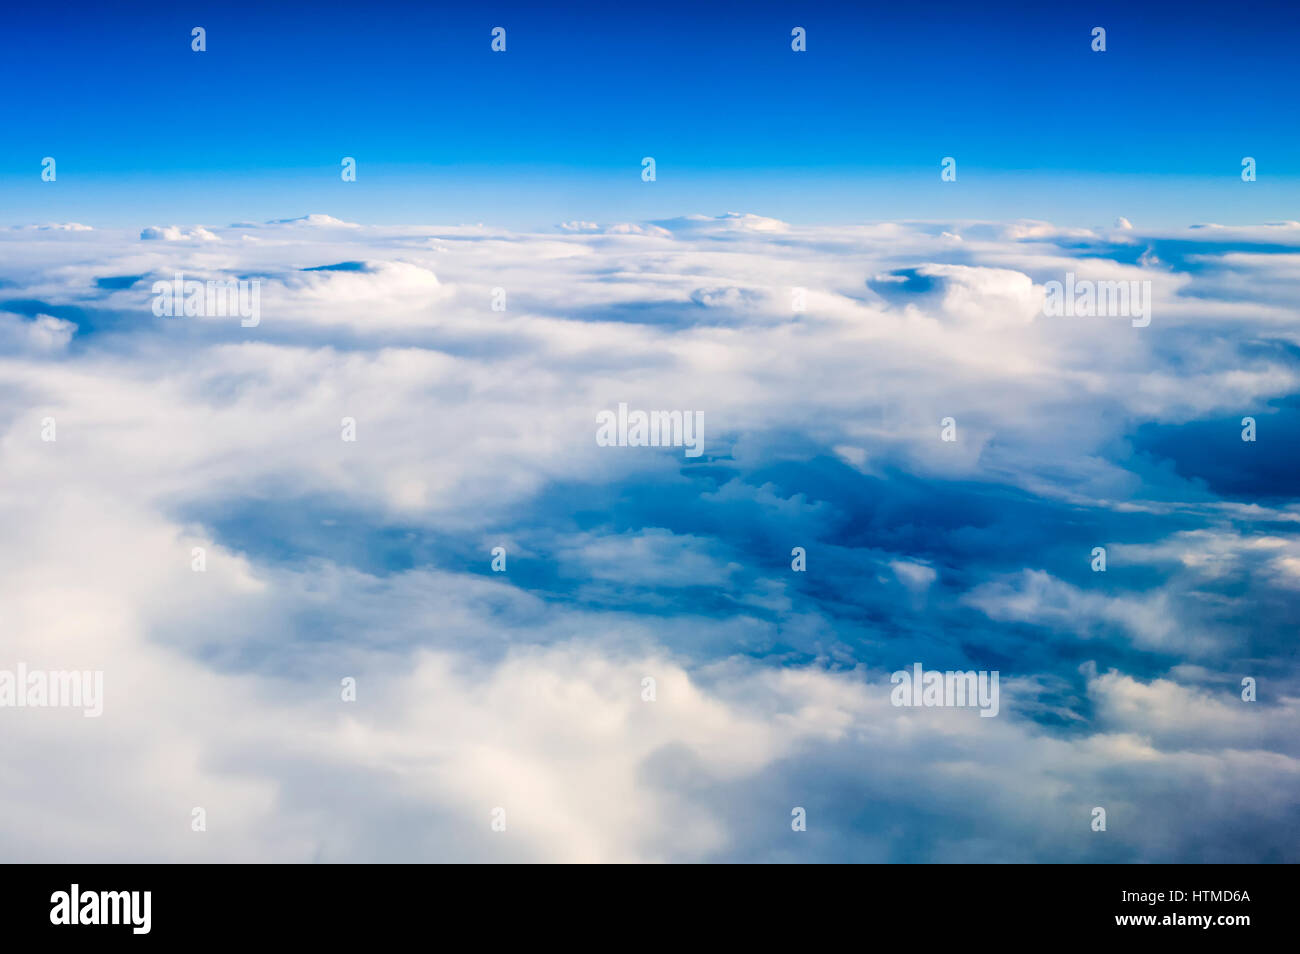 View of cloud formation and colourful skies flying above the clouds. Stock Photo